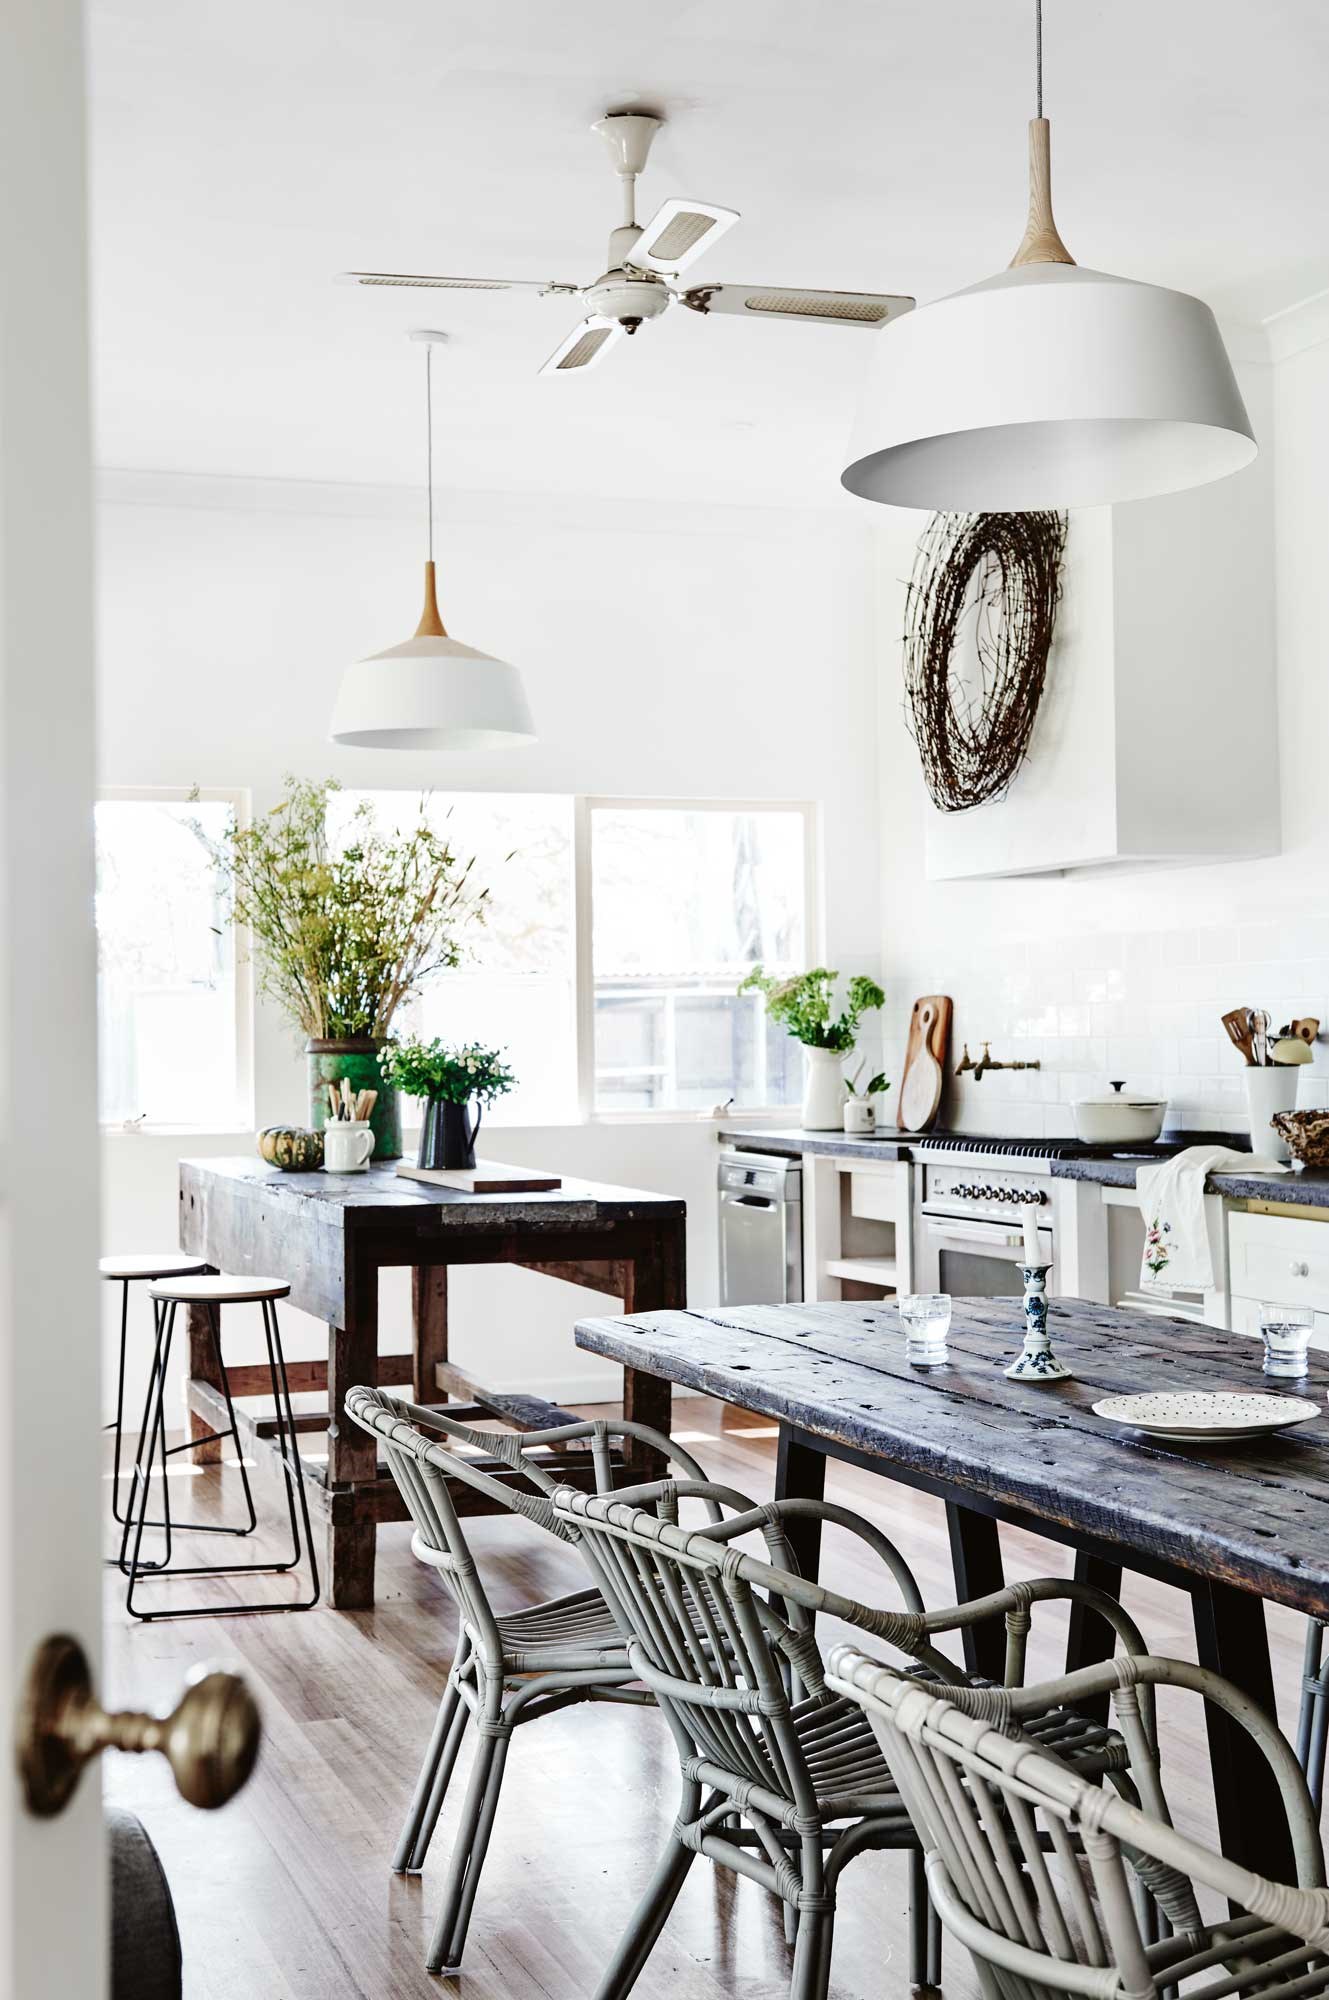 Renovating a farmhouse kitchen can often be a grand affair, but at her [home in central Victoria](https://www.homestolove.com.au/a-1930s-farmhouse-mixes-old-and-new-13837-target=\